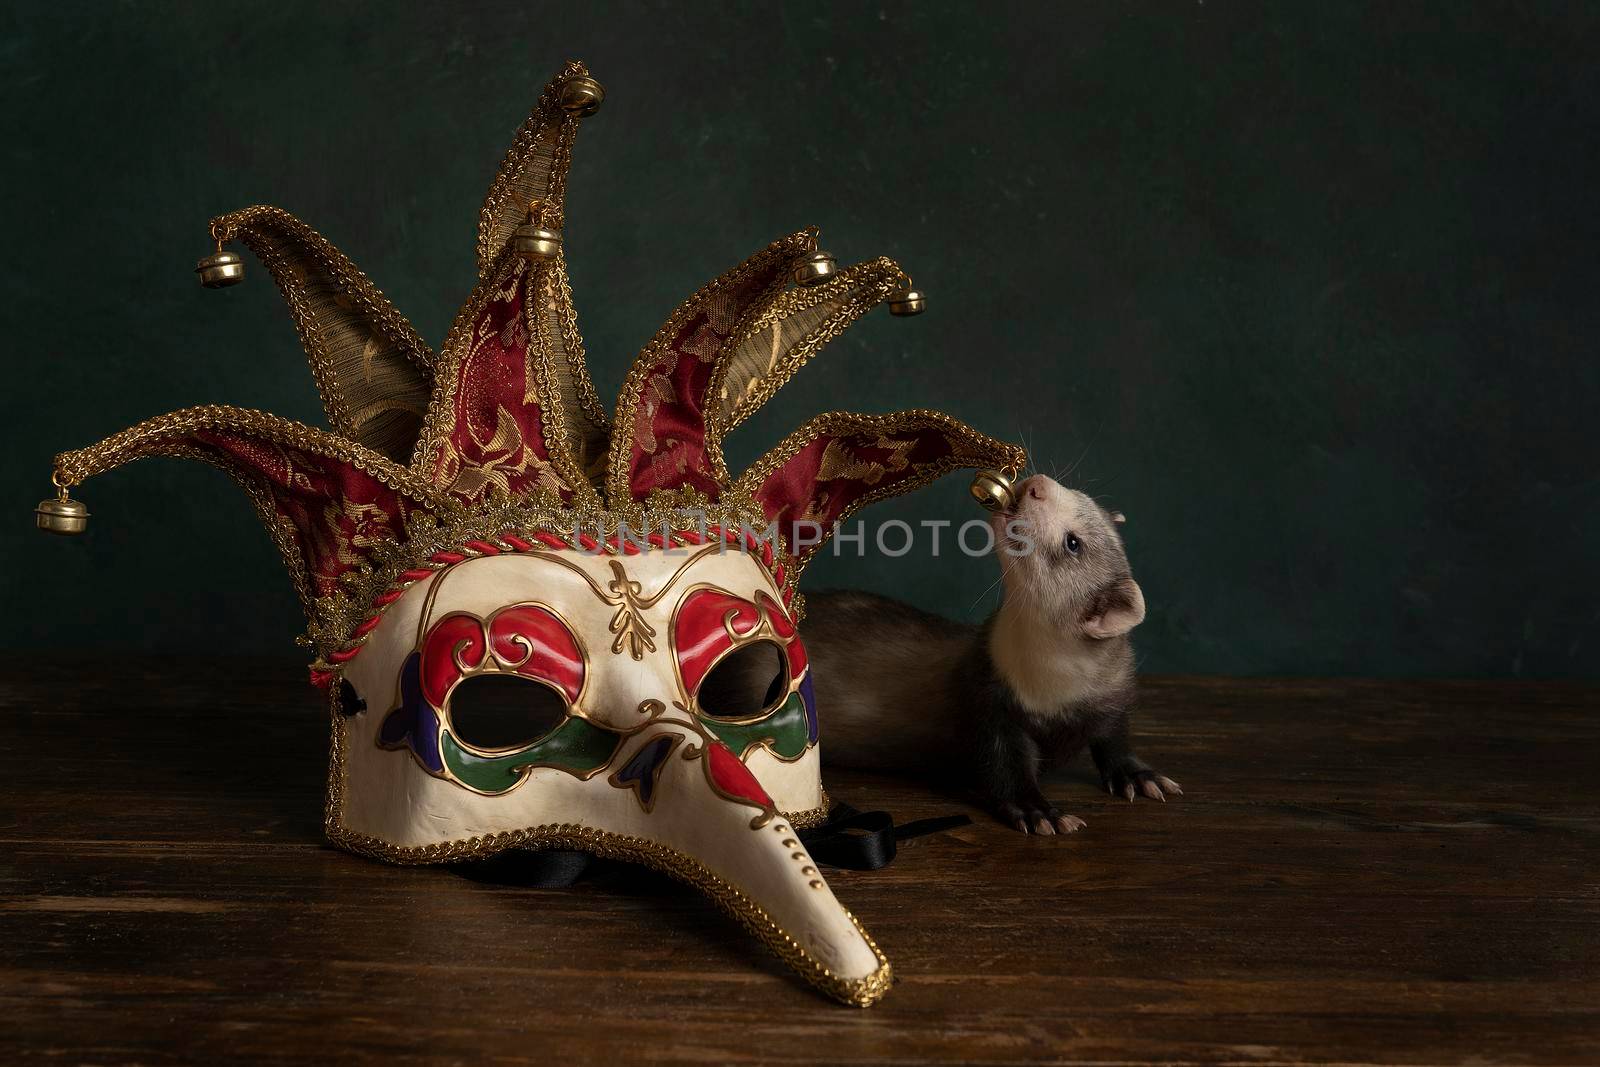 A curious young ferret or polecat puppy in a stillife scene with a Carnivale or Mardi Gras mask against a green background by LeoniekvanderVliet